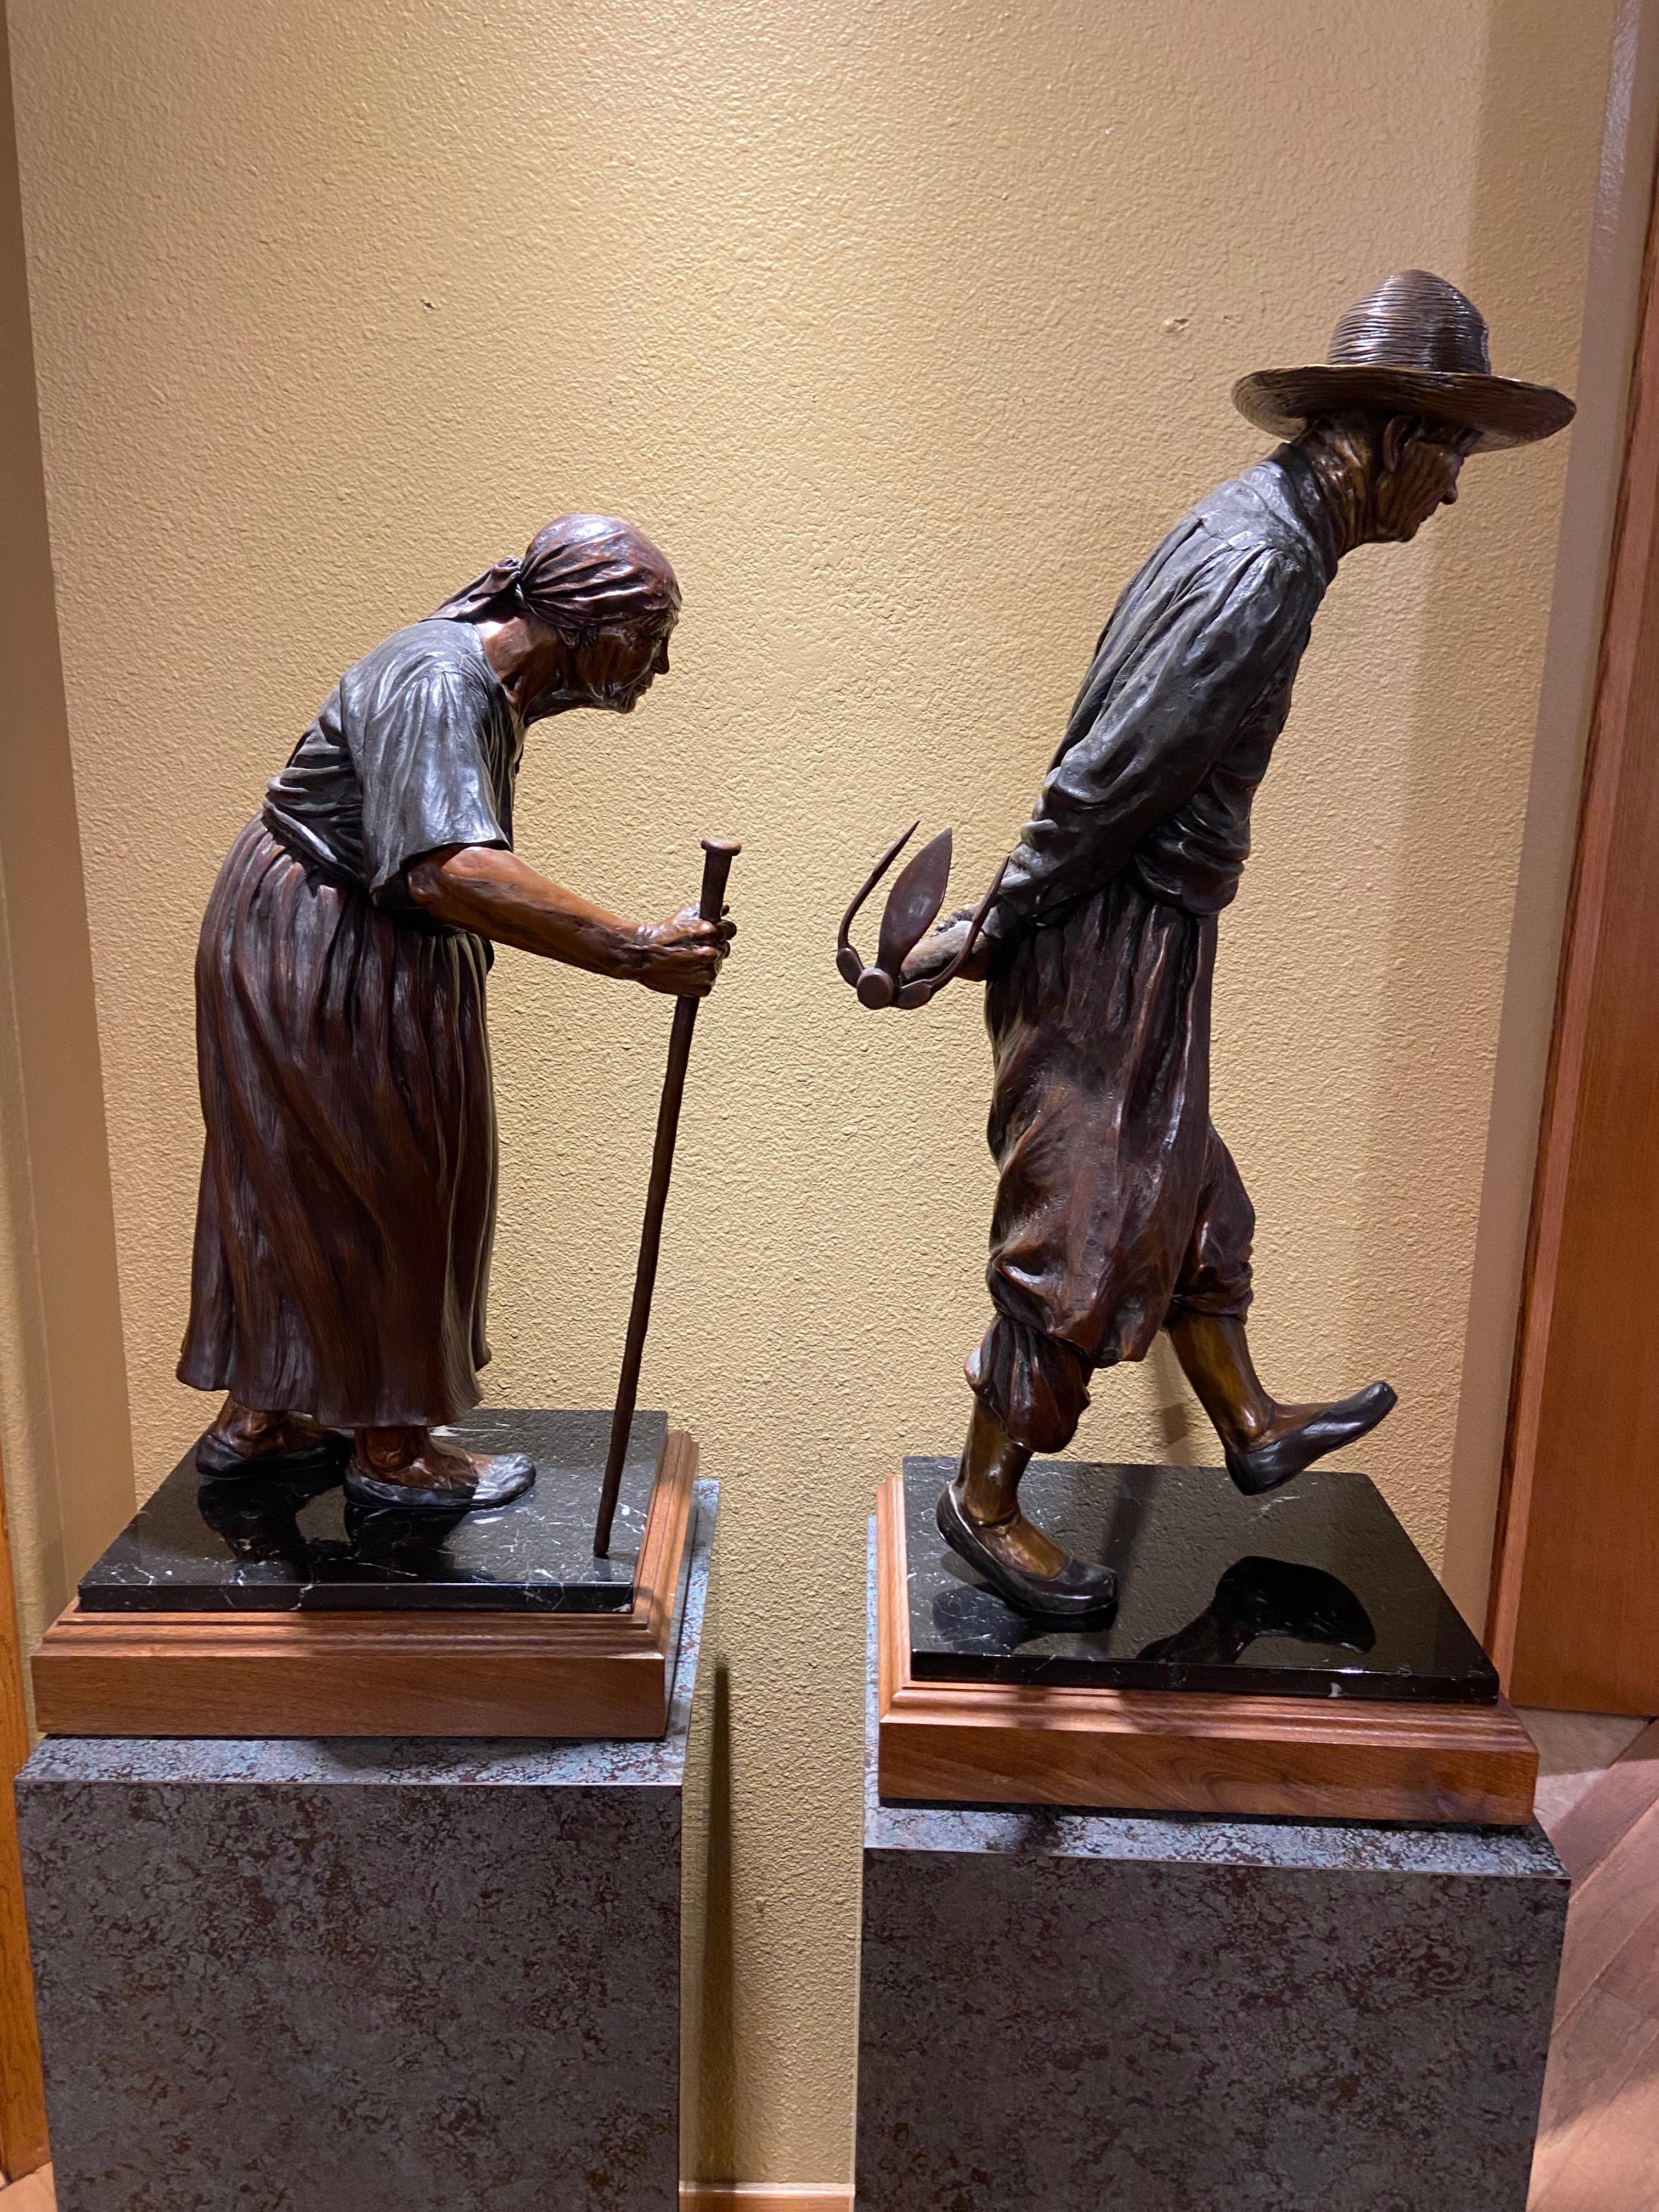 Farmer Han and the Farmer's Wife by Dee Clements
Figurative Bronze Pair. Excellent condition. Has been reviewed by the artist.
Farmer Han, measures 33x11x14